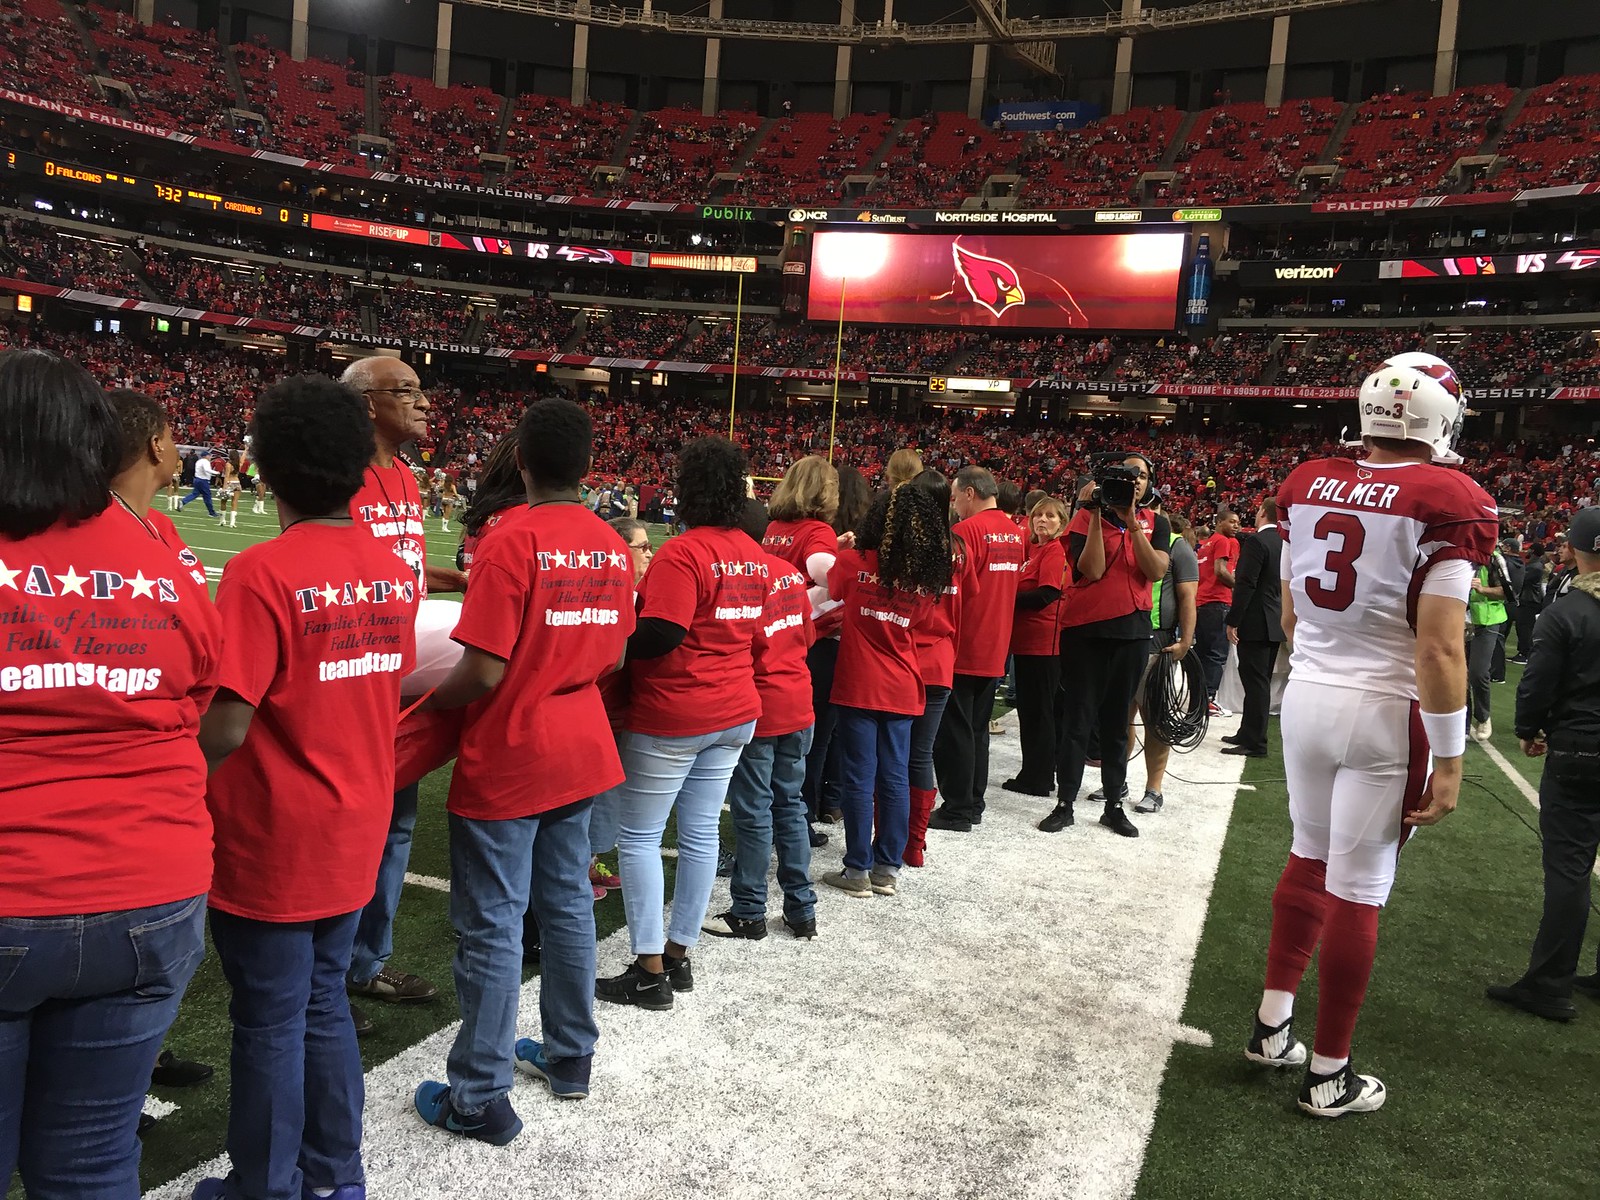 2016_T4T_ATL Falcons Game Day 30